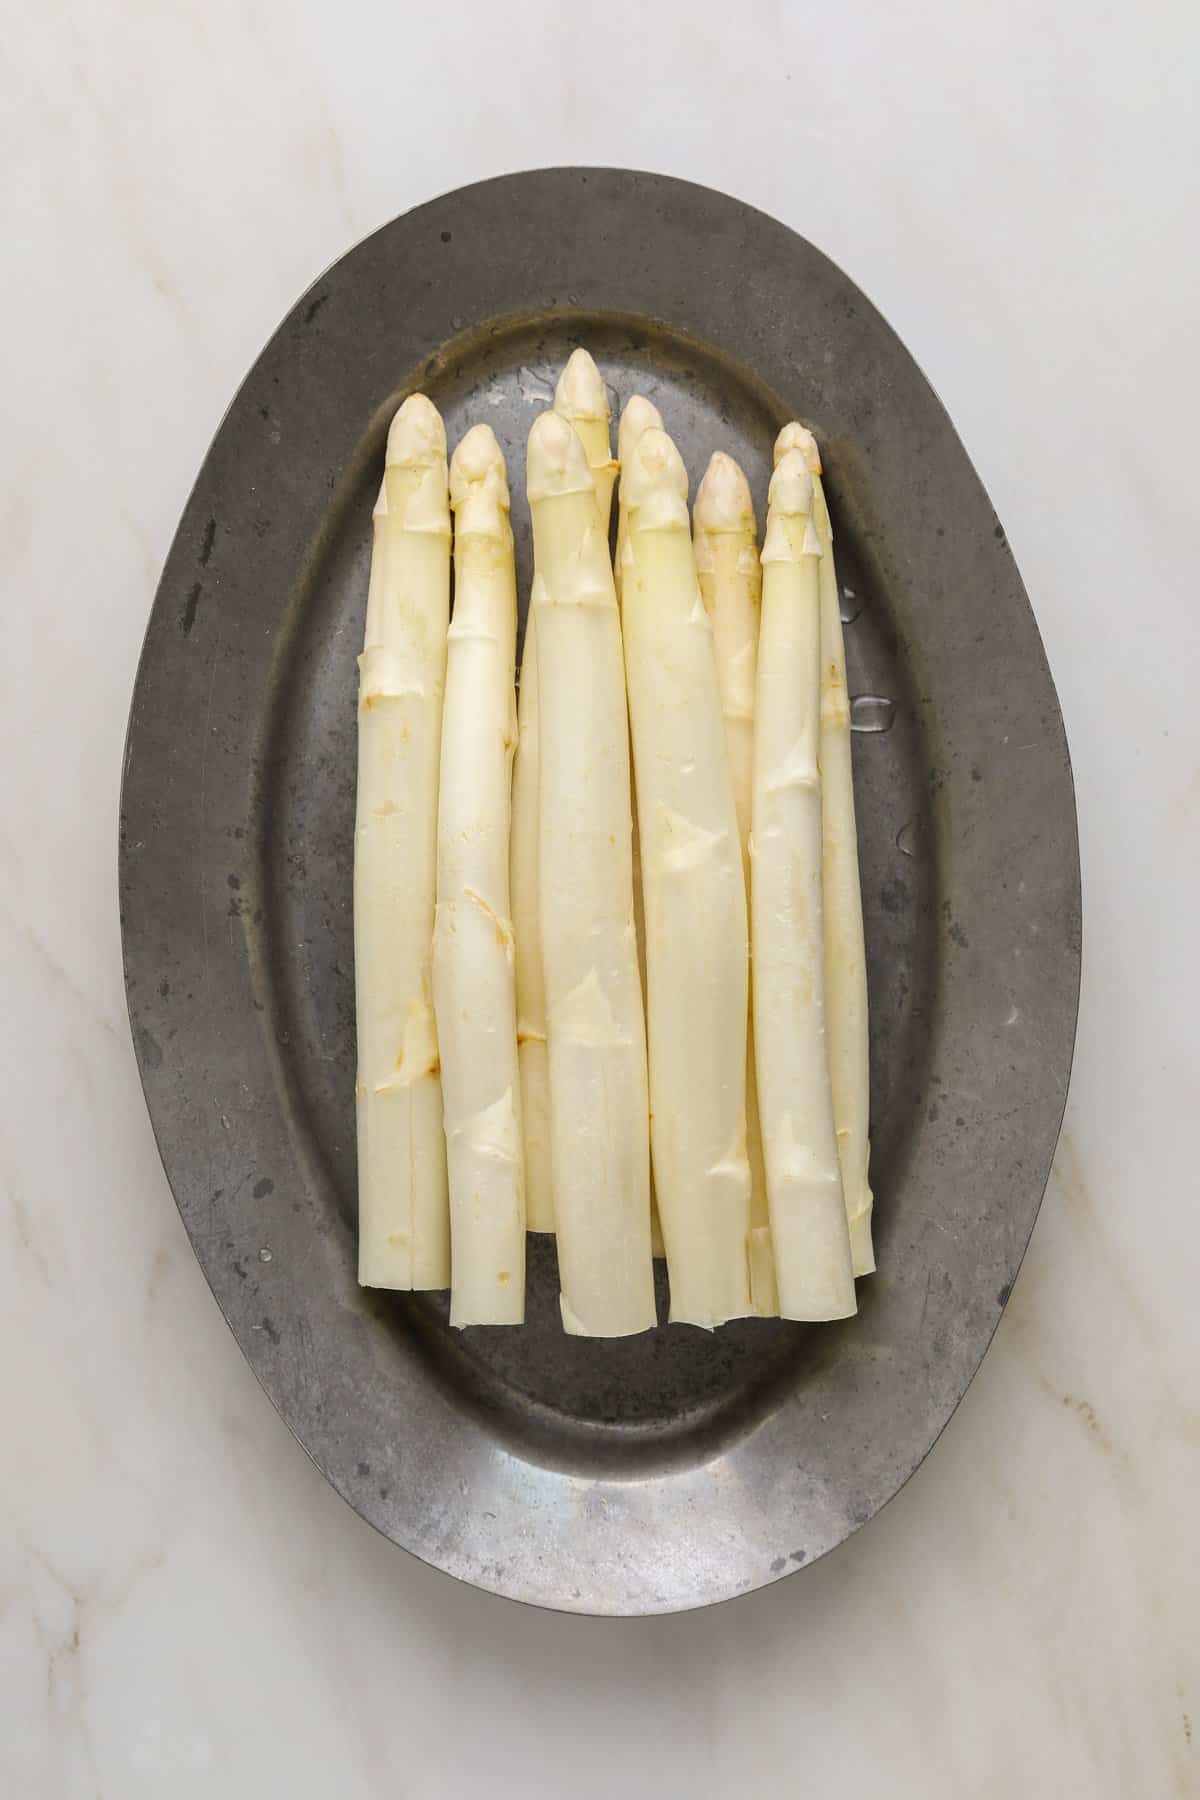 White asparagus spears on a silver platter resting on a marble stone table top.